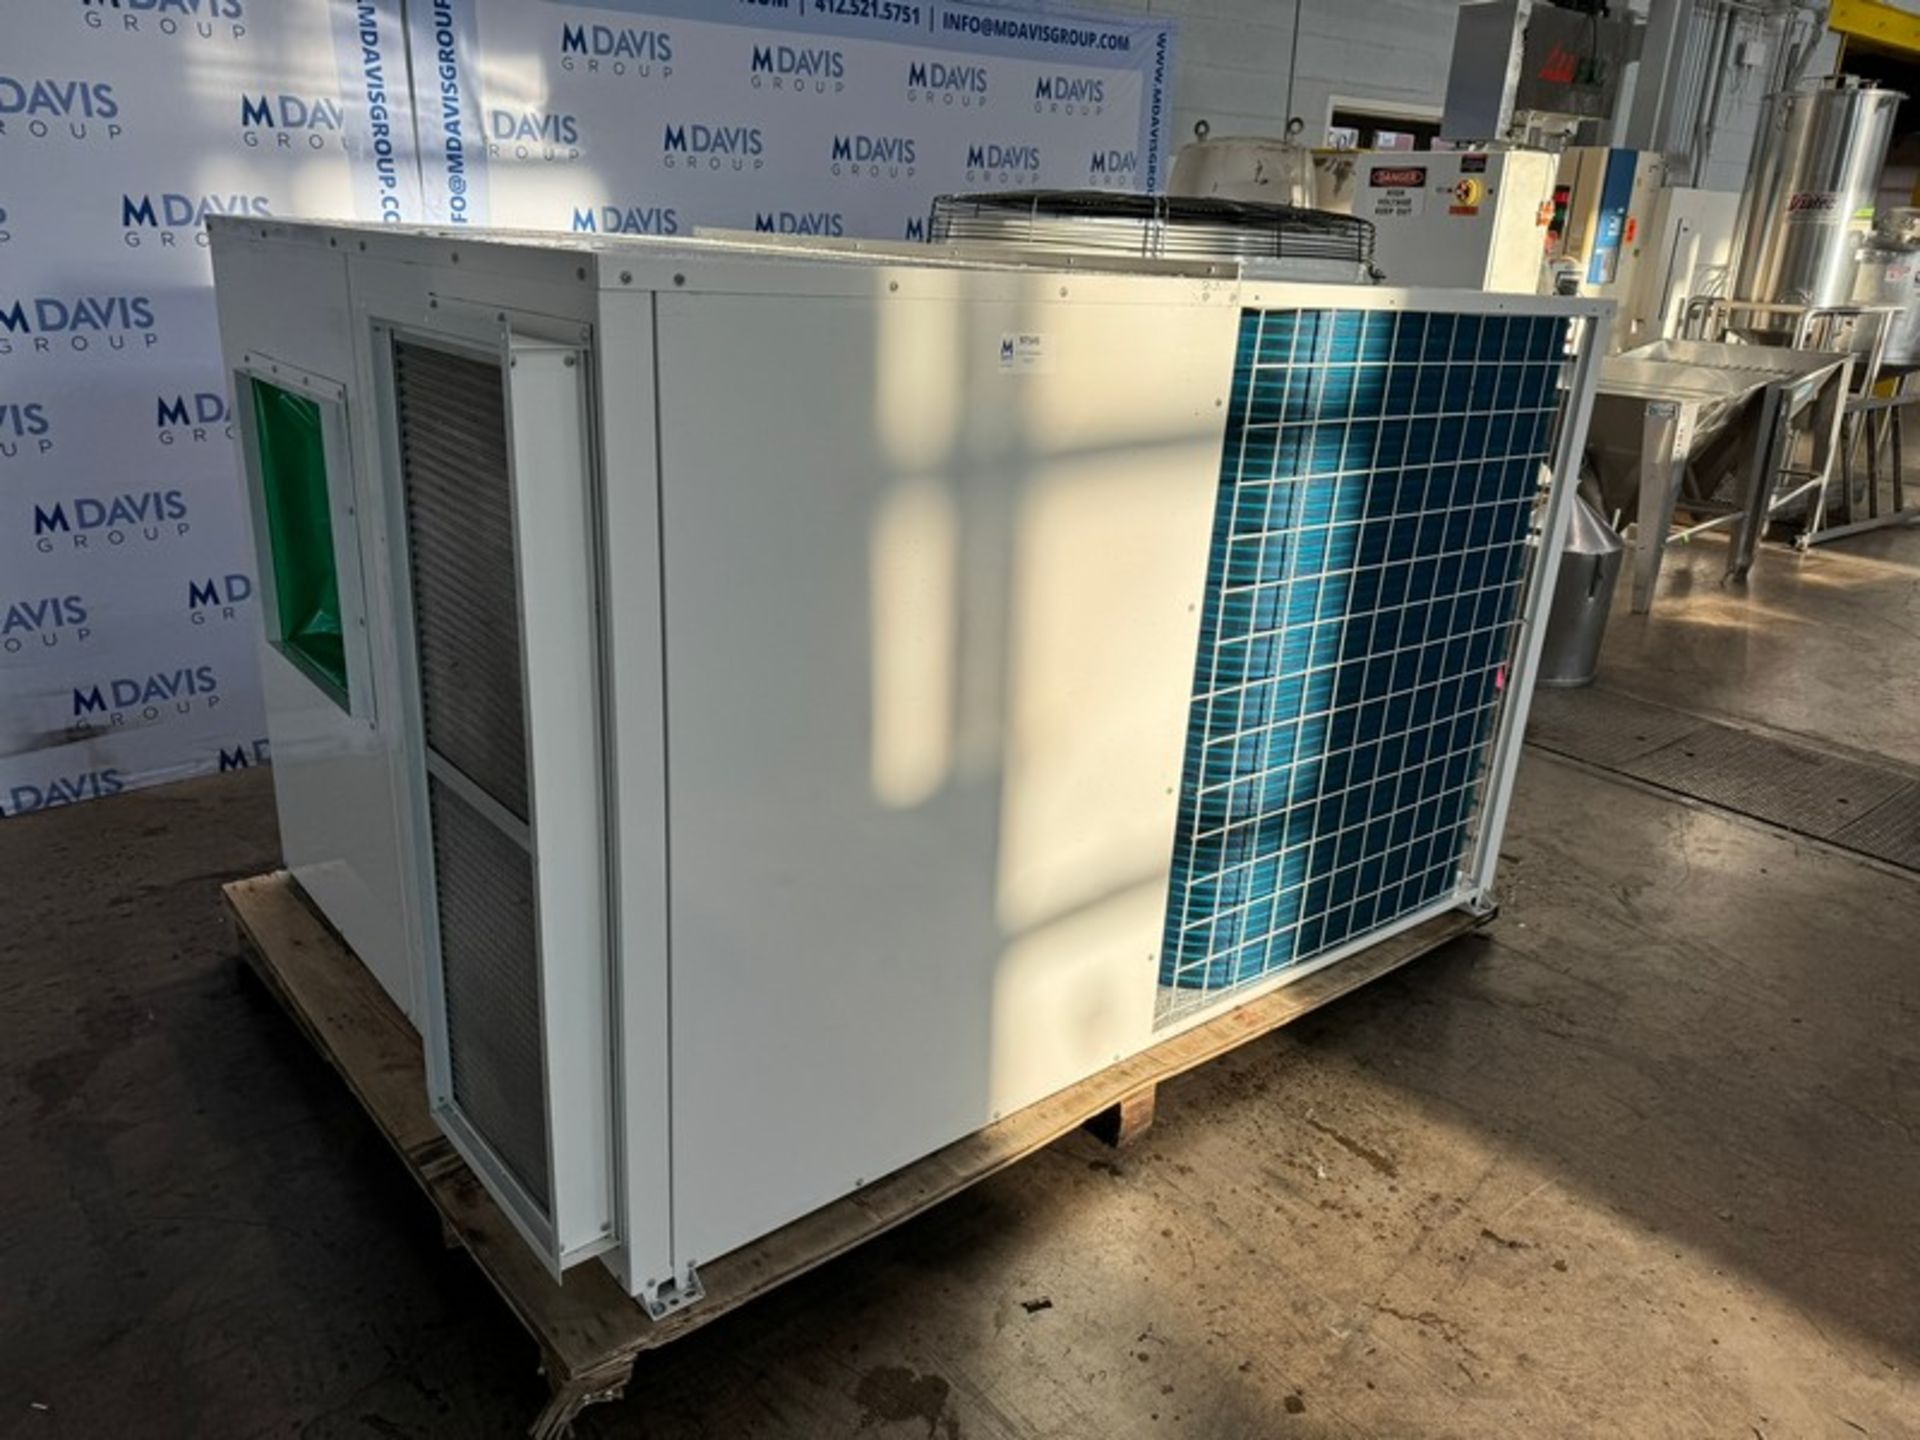 NEW 2022 SHENHLIN Roof Mounted Air Cooled Package Unit, S/N C5020221018R001, Cooling Capacity 70 kW, - Image 2 of 7